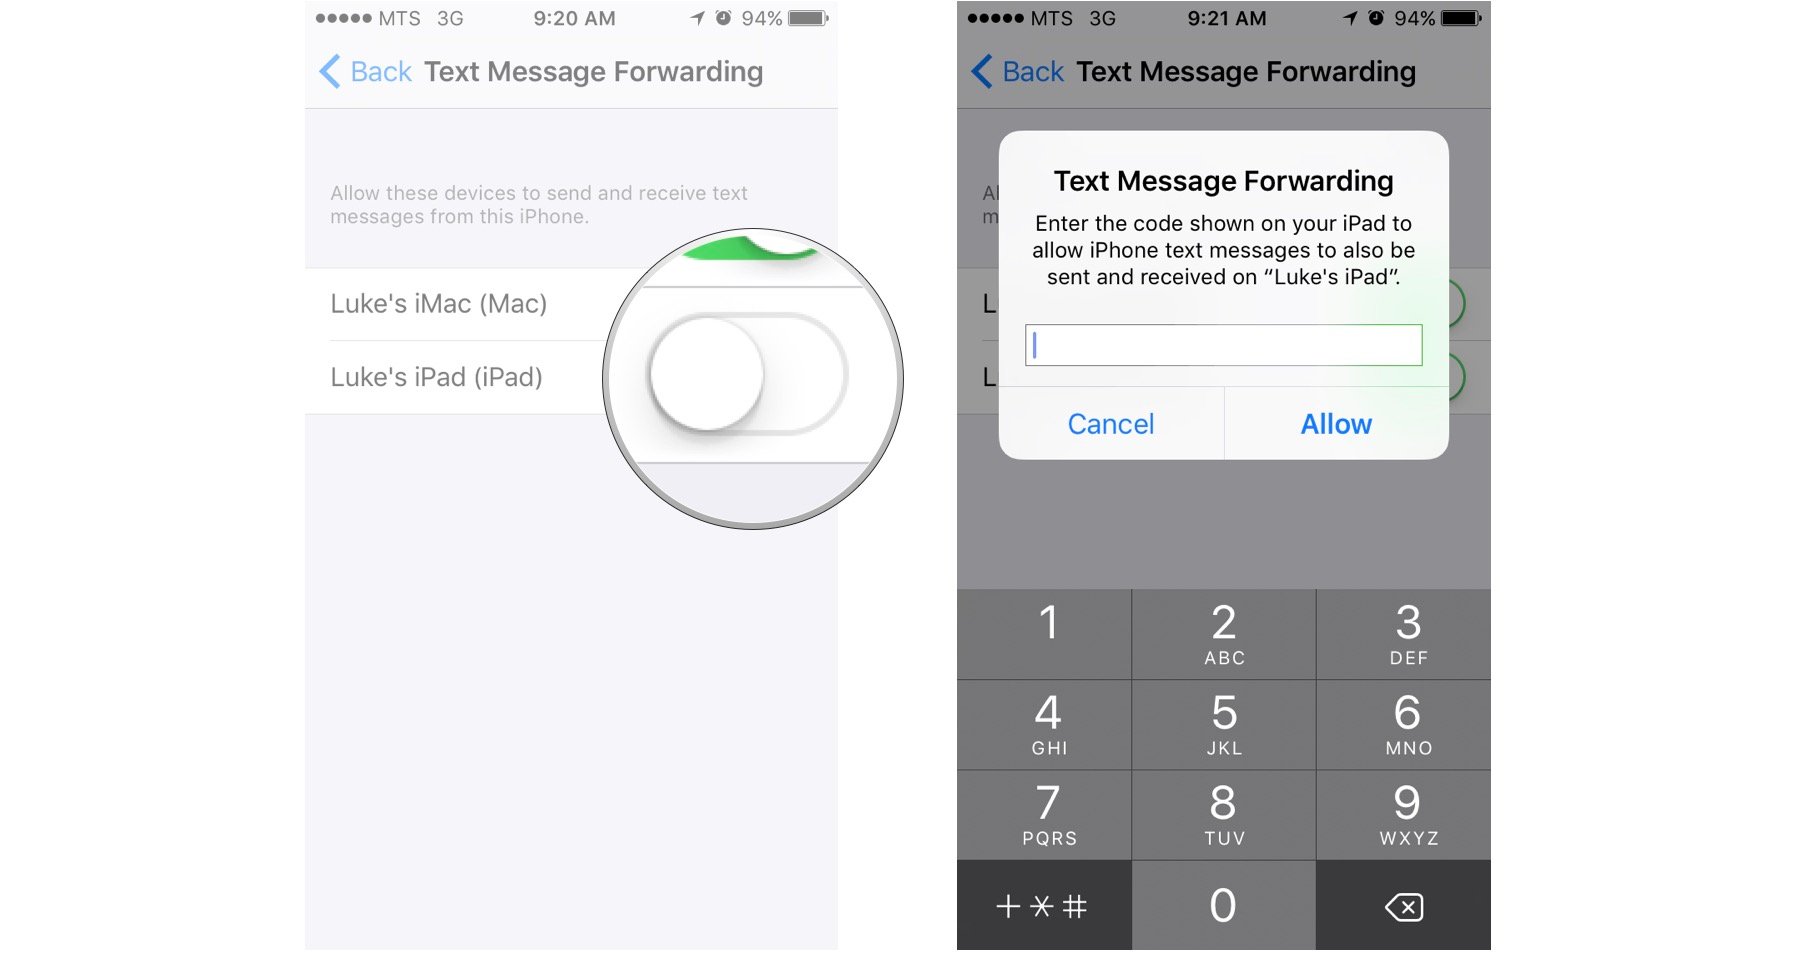 How to receive text messages for android on mac os